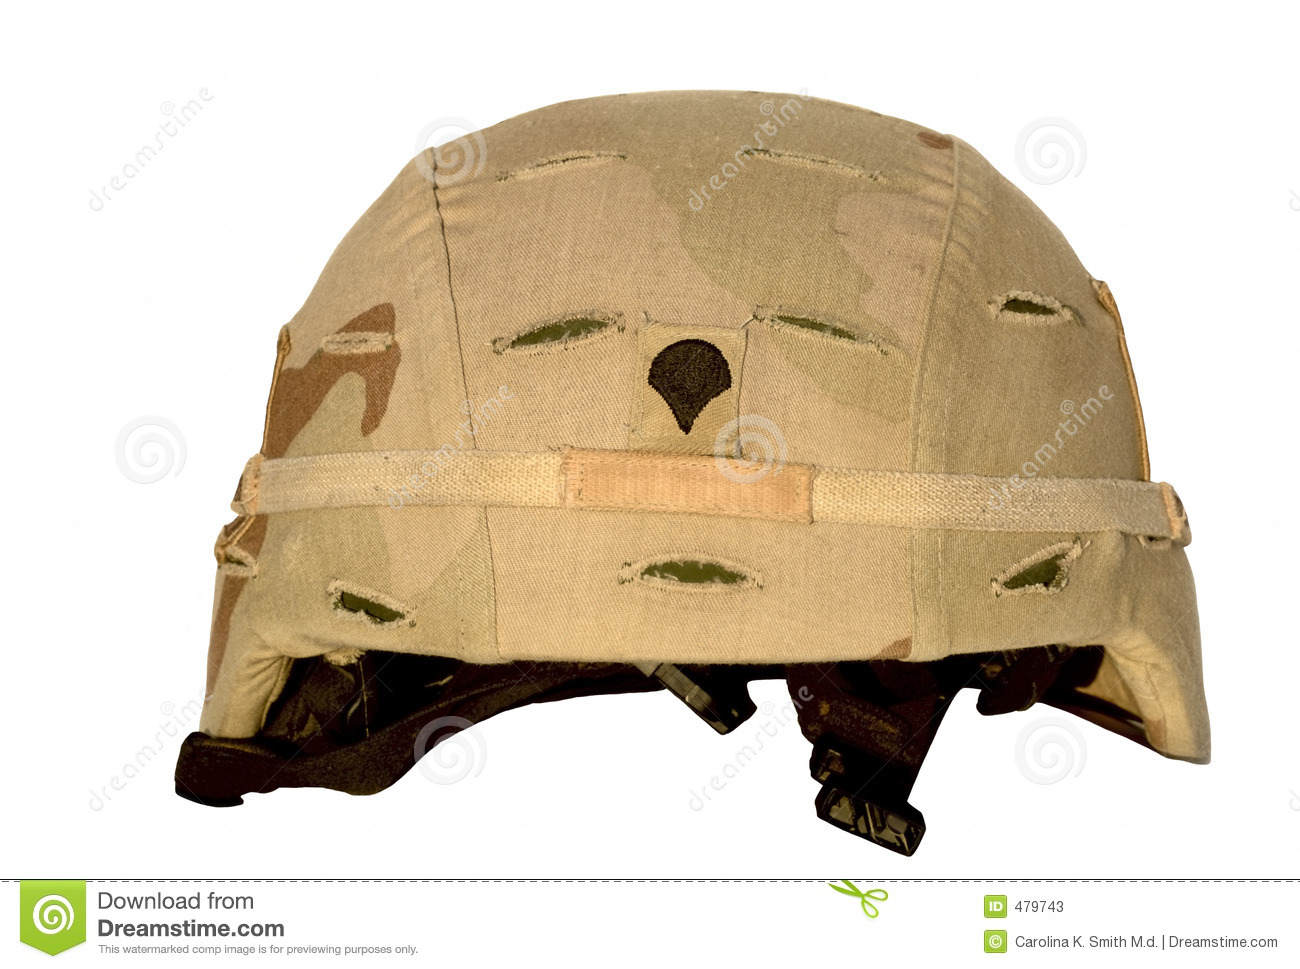 Real U S  Army Helmet With Chin Strap  This One Served In Iraq  Focus